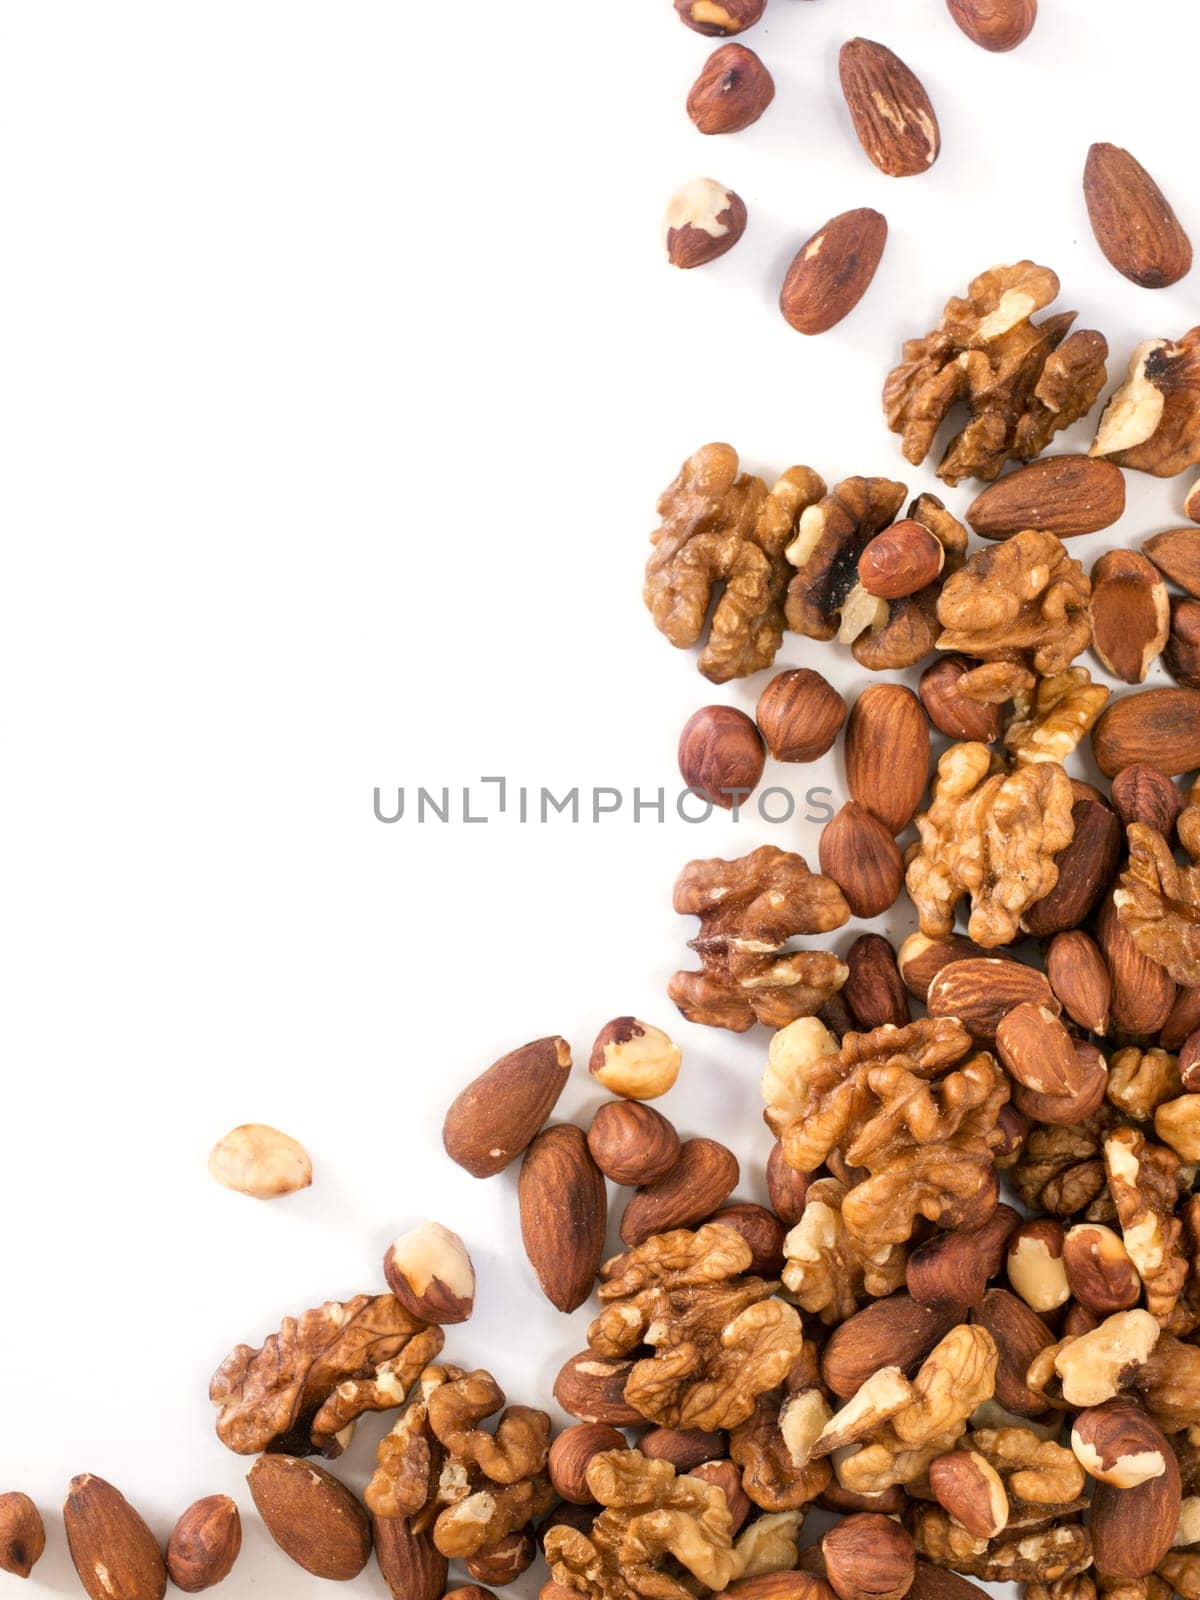 Background of mixed nuts - hazelnuts, walnuts, almonds - with copy space. Isolated one edge. Top view or flat lay. Vertical image